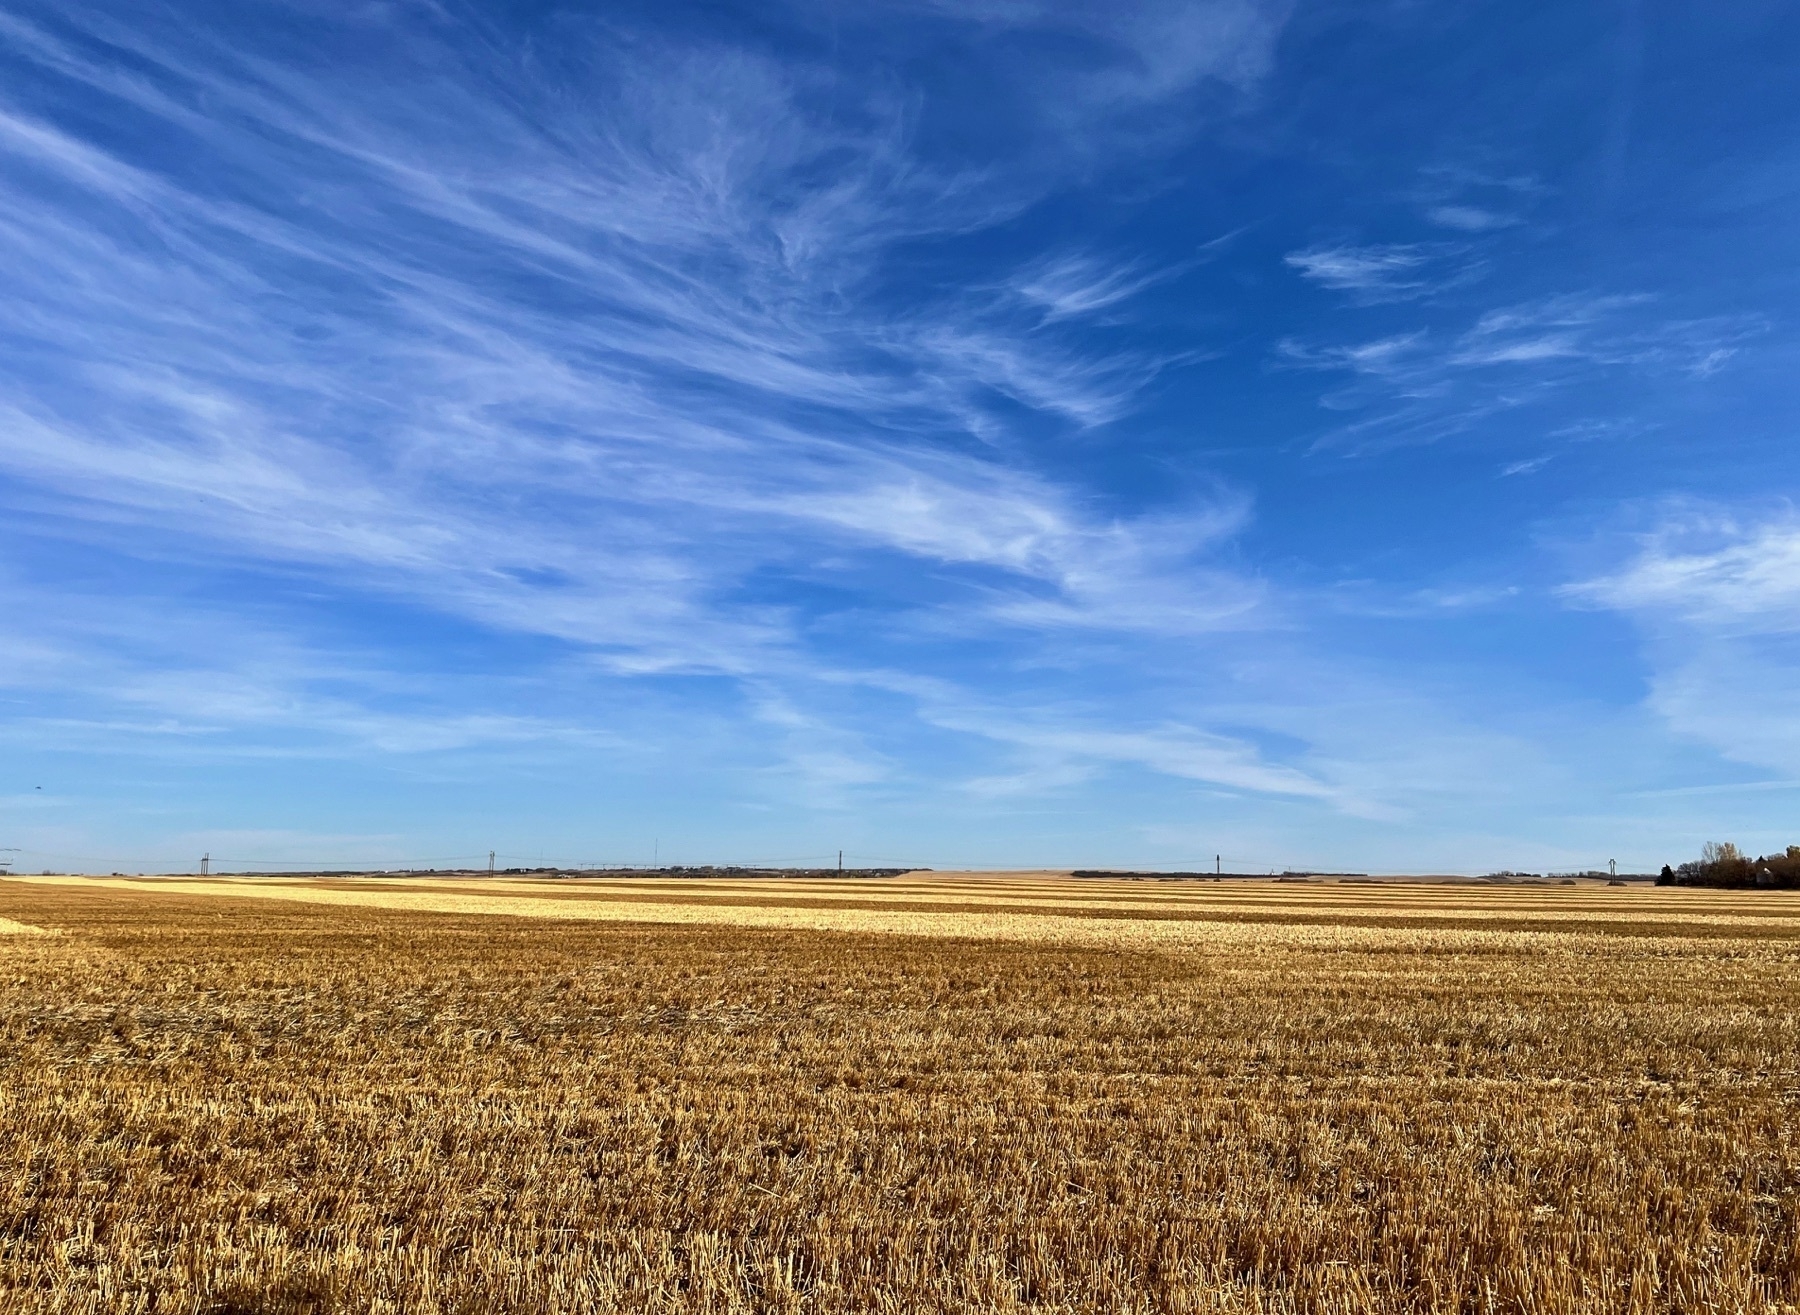 A harvested field, and blue skies with a few clouds.